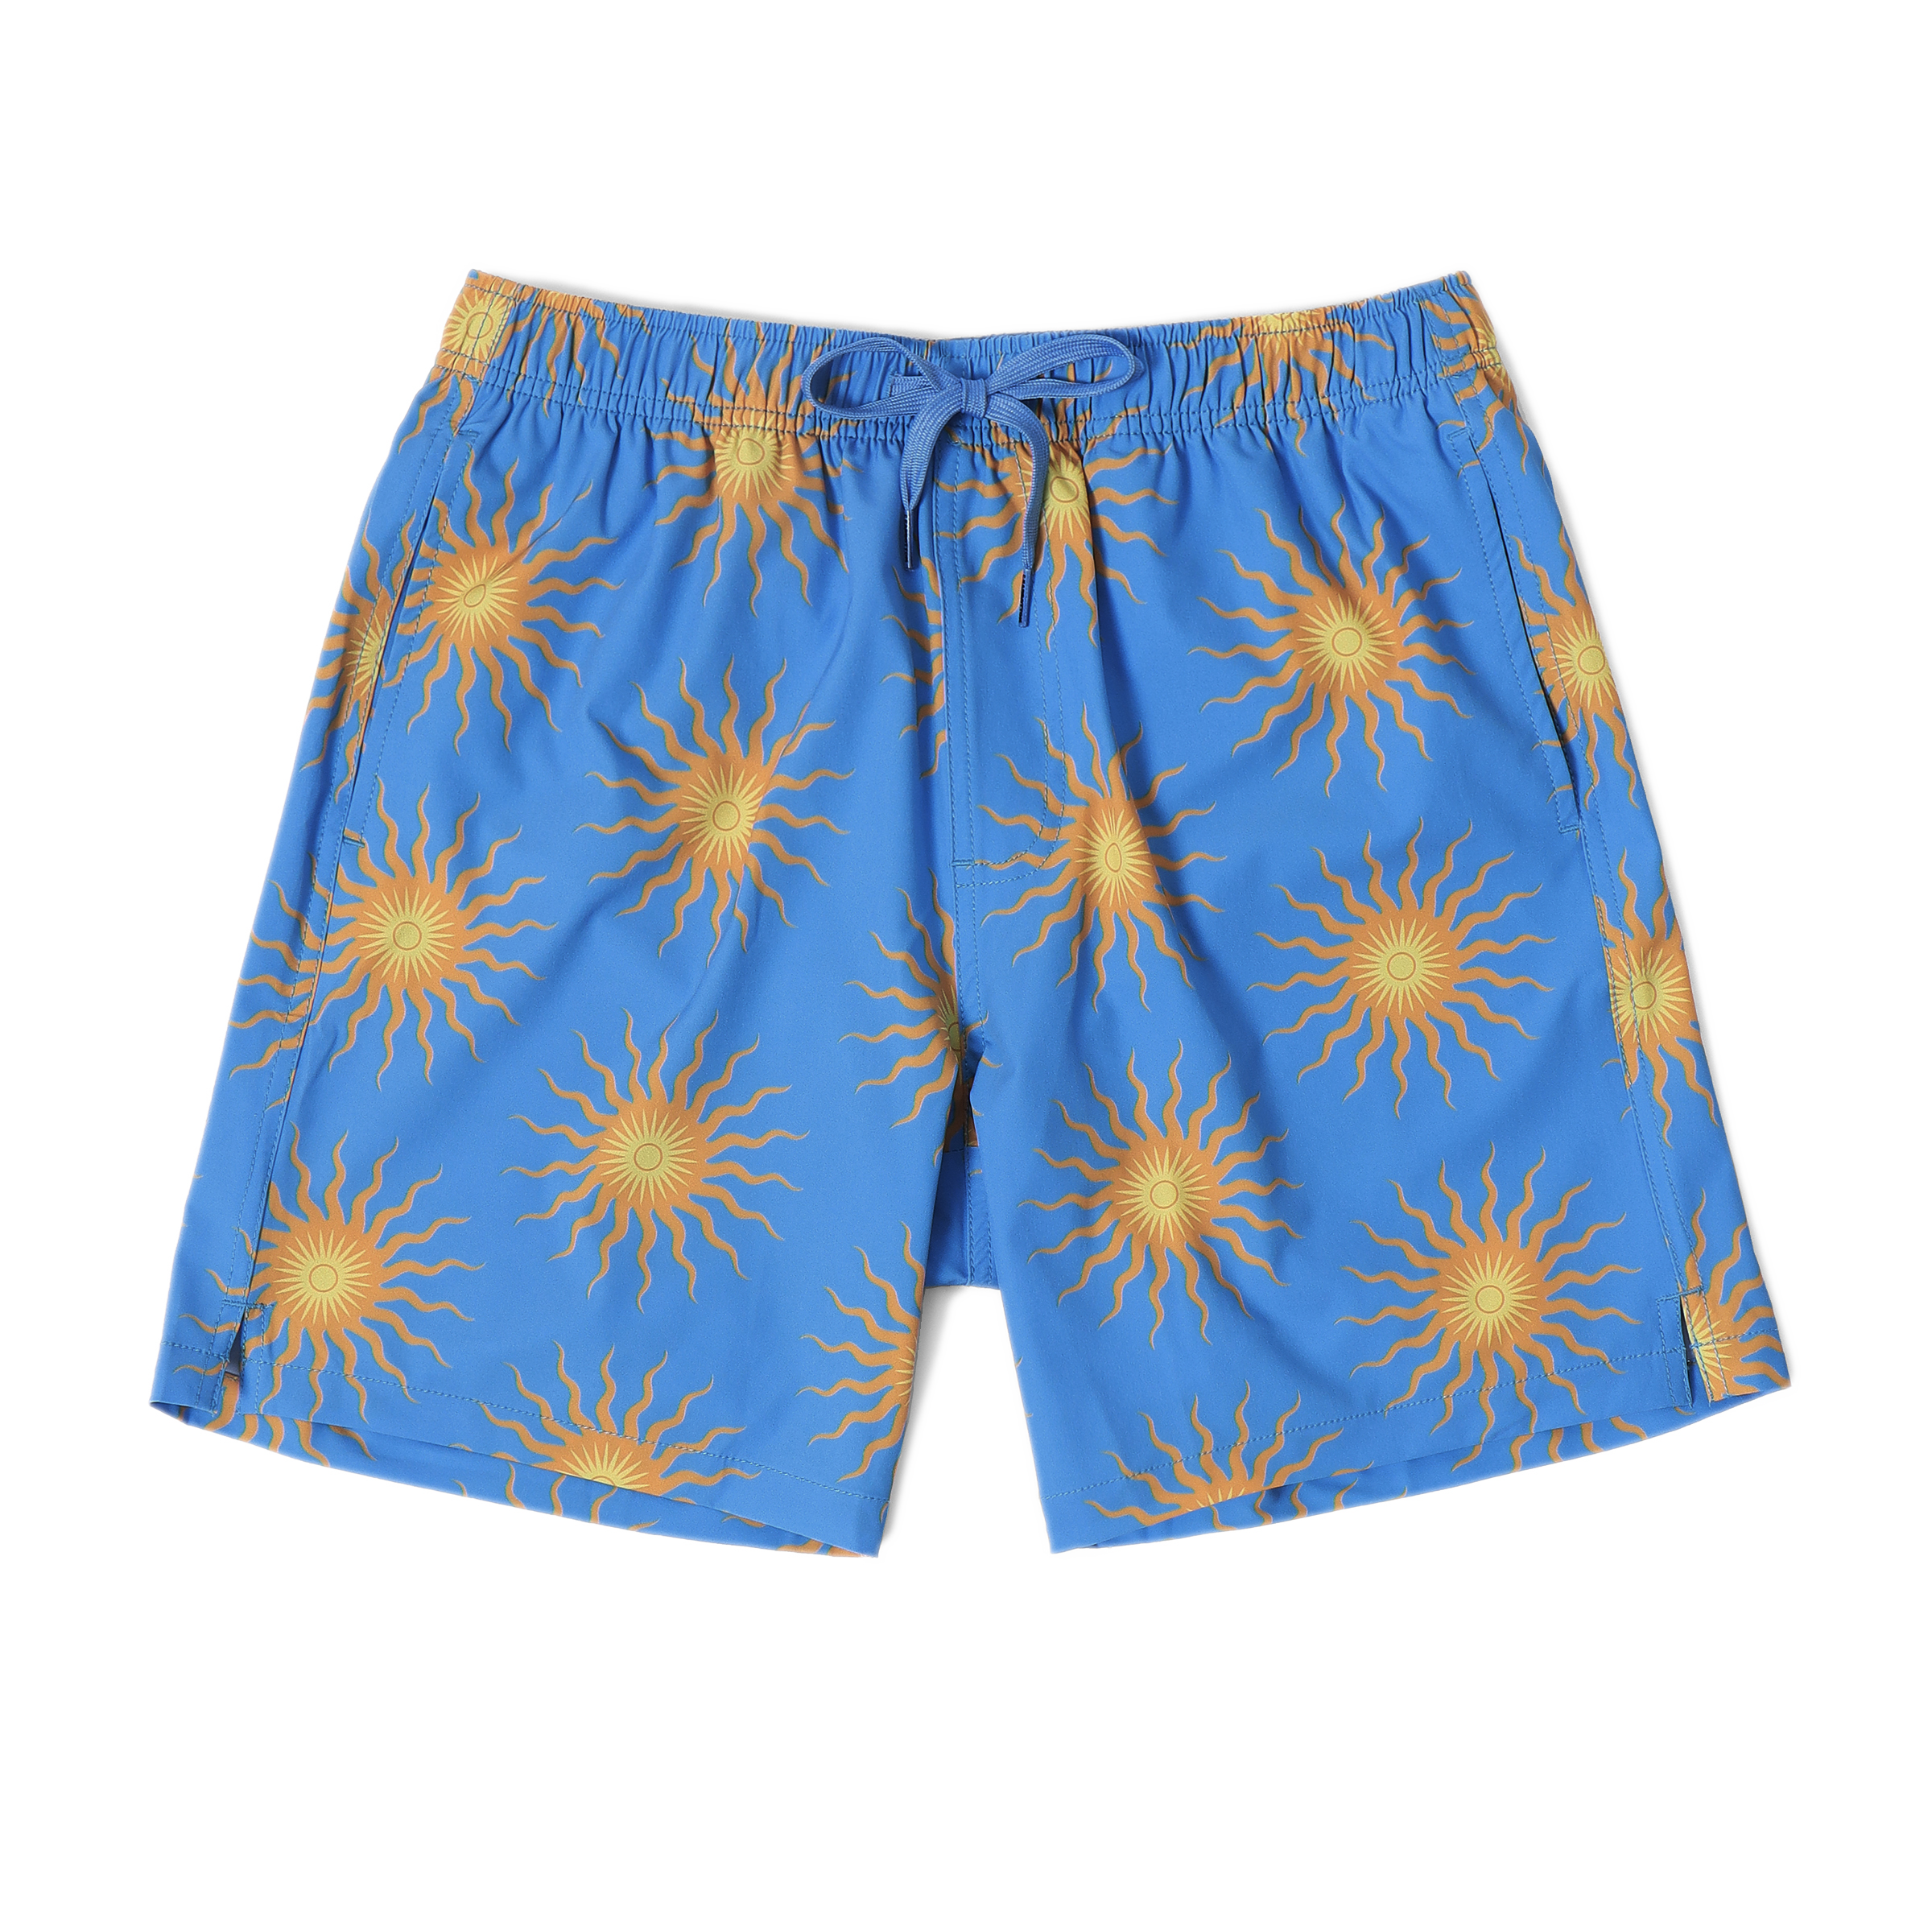 Stretch Swim 7" Sunburst front with an elastic waistband, two inseam pockets, and a dyed-to-match drawstring